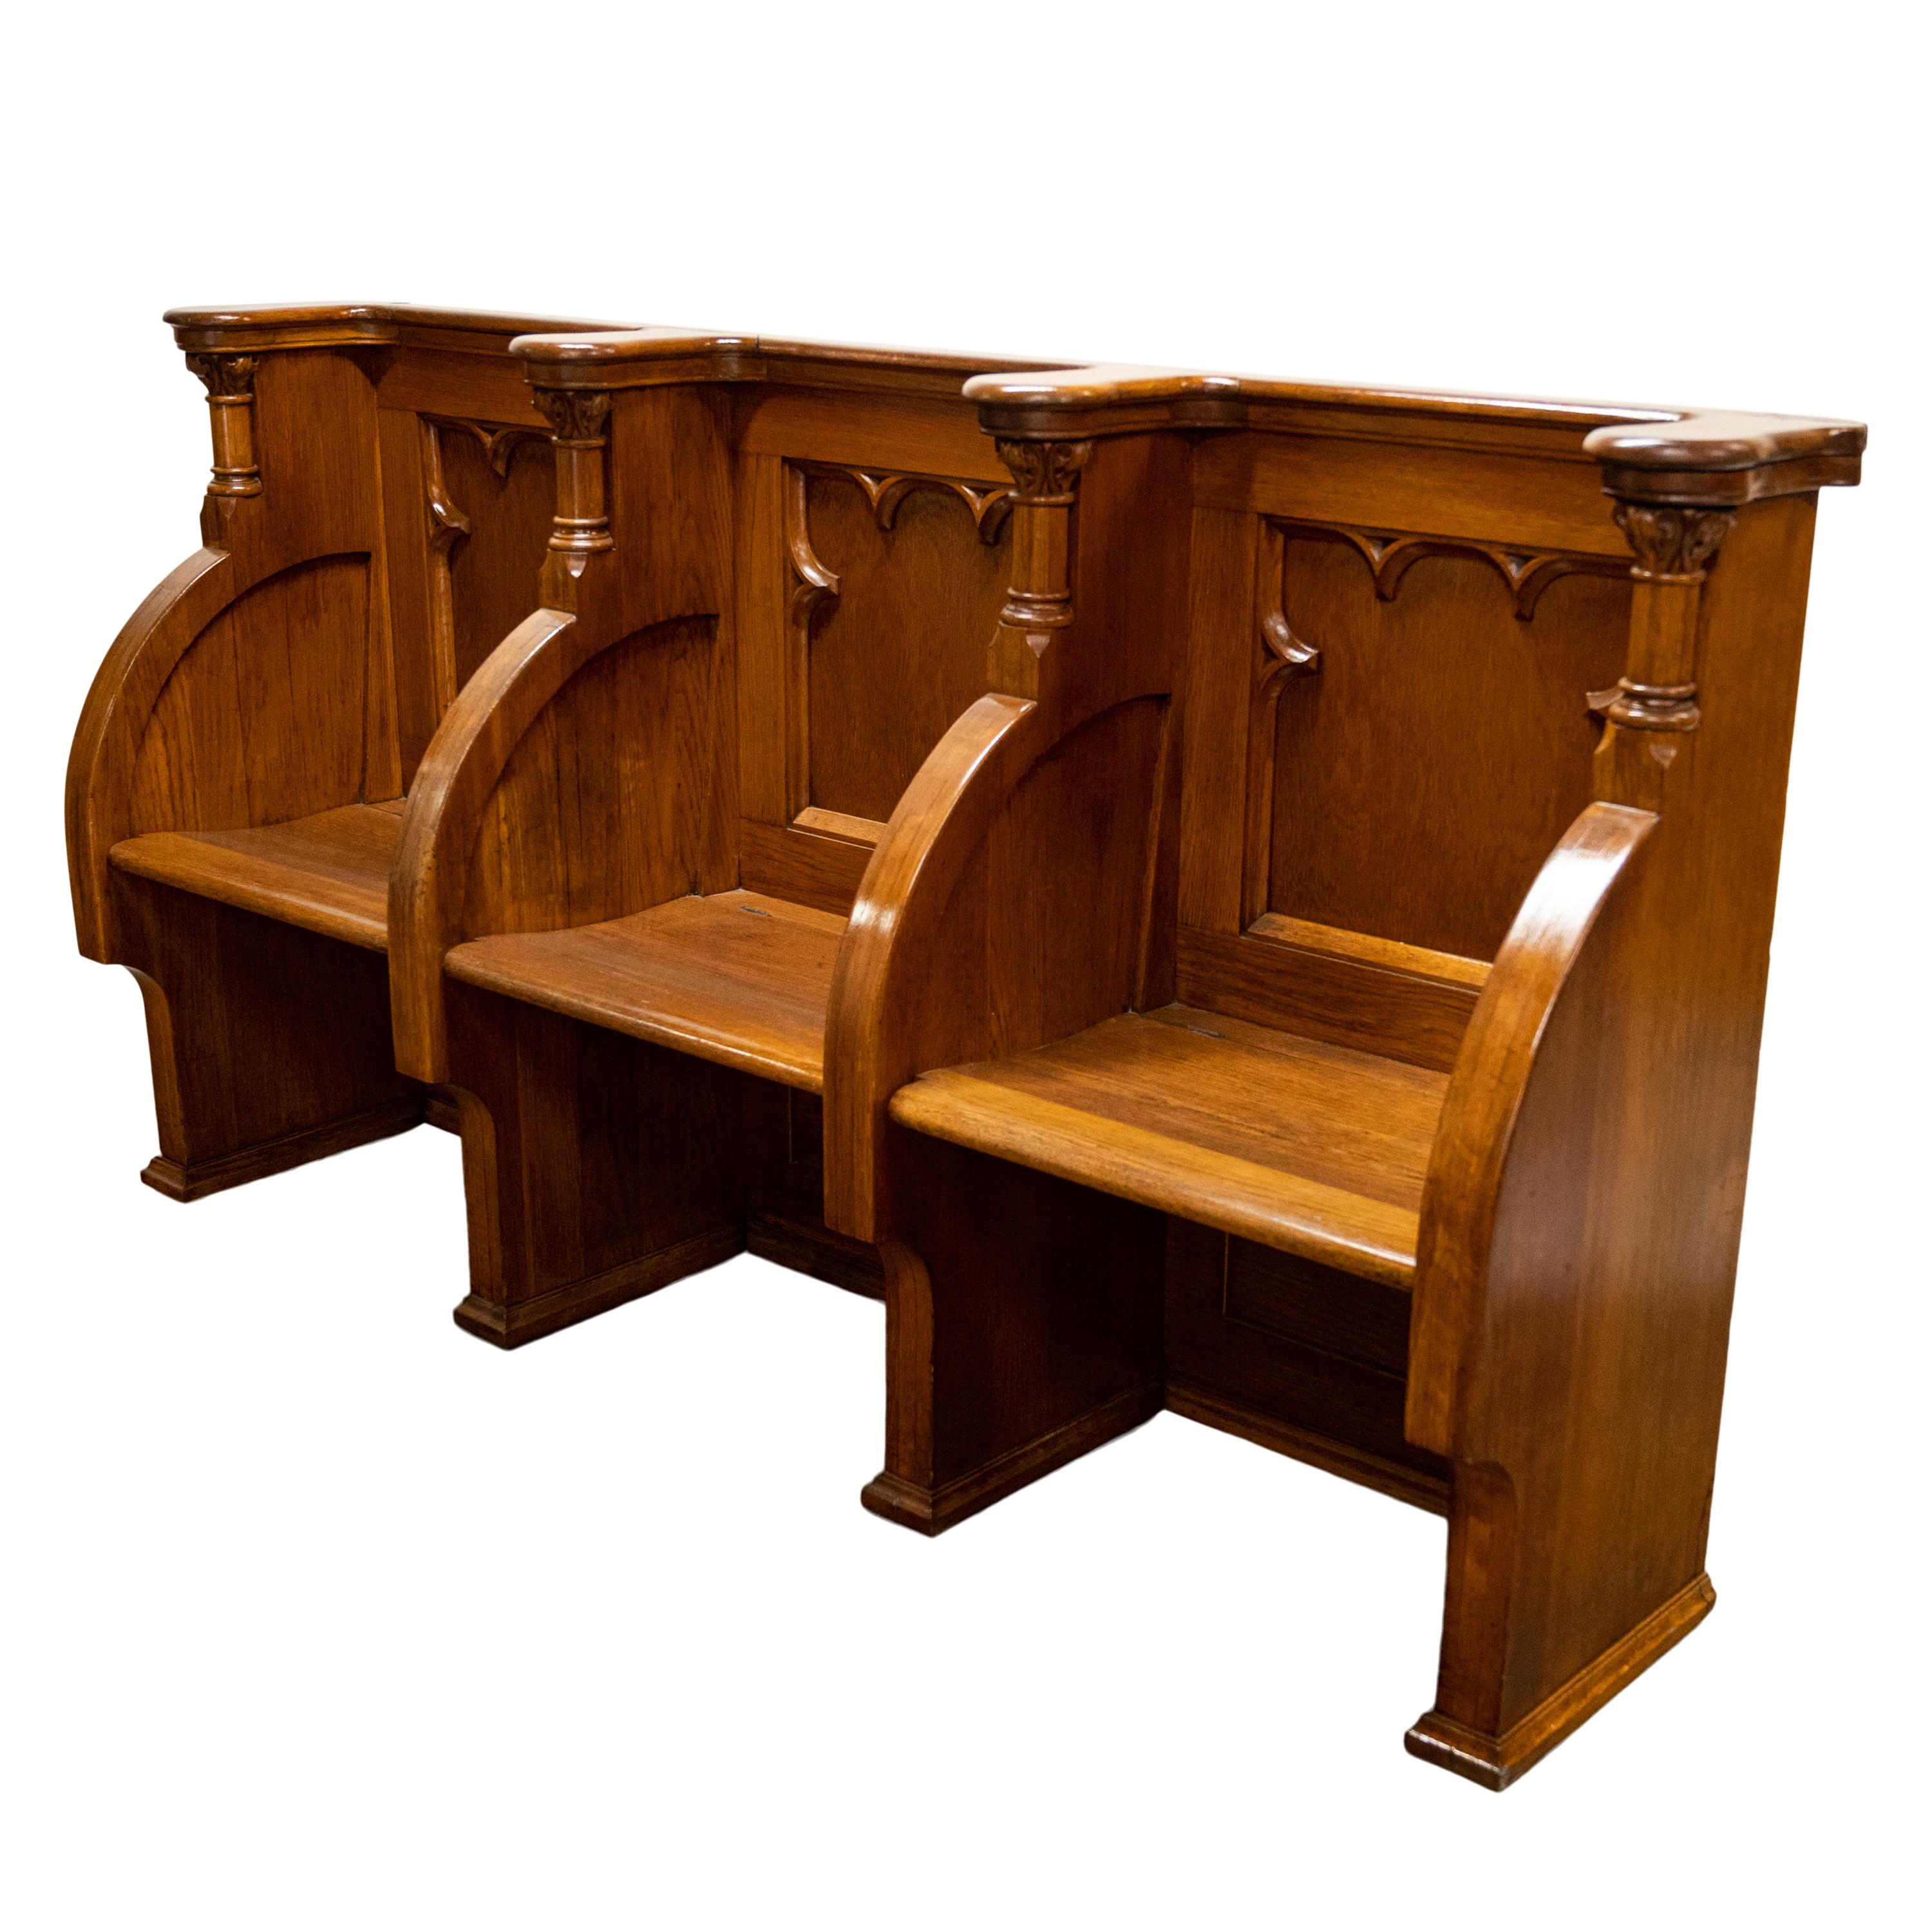 Antique Gothic Revival Pugin Carved Oak Church 3 Seat Pew Bench Choir Stall 1850 3